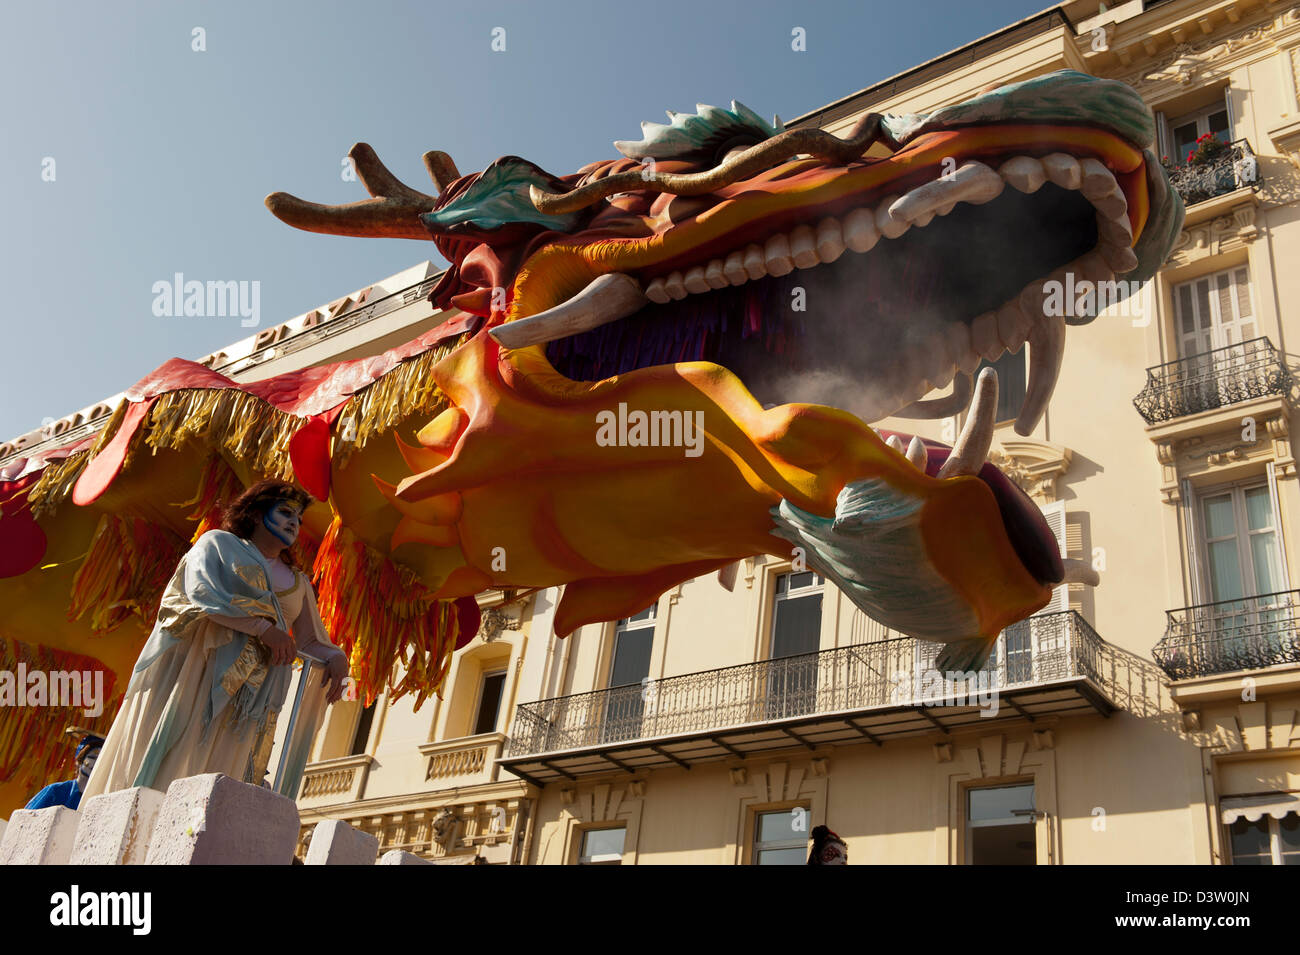 Large dragon float parades down the streets of Nice during Carnival festivities Stock Photo